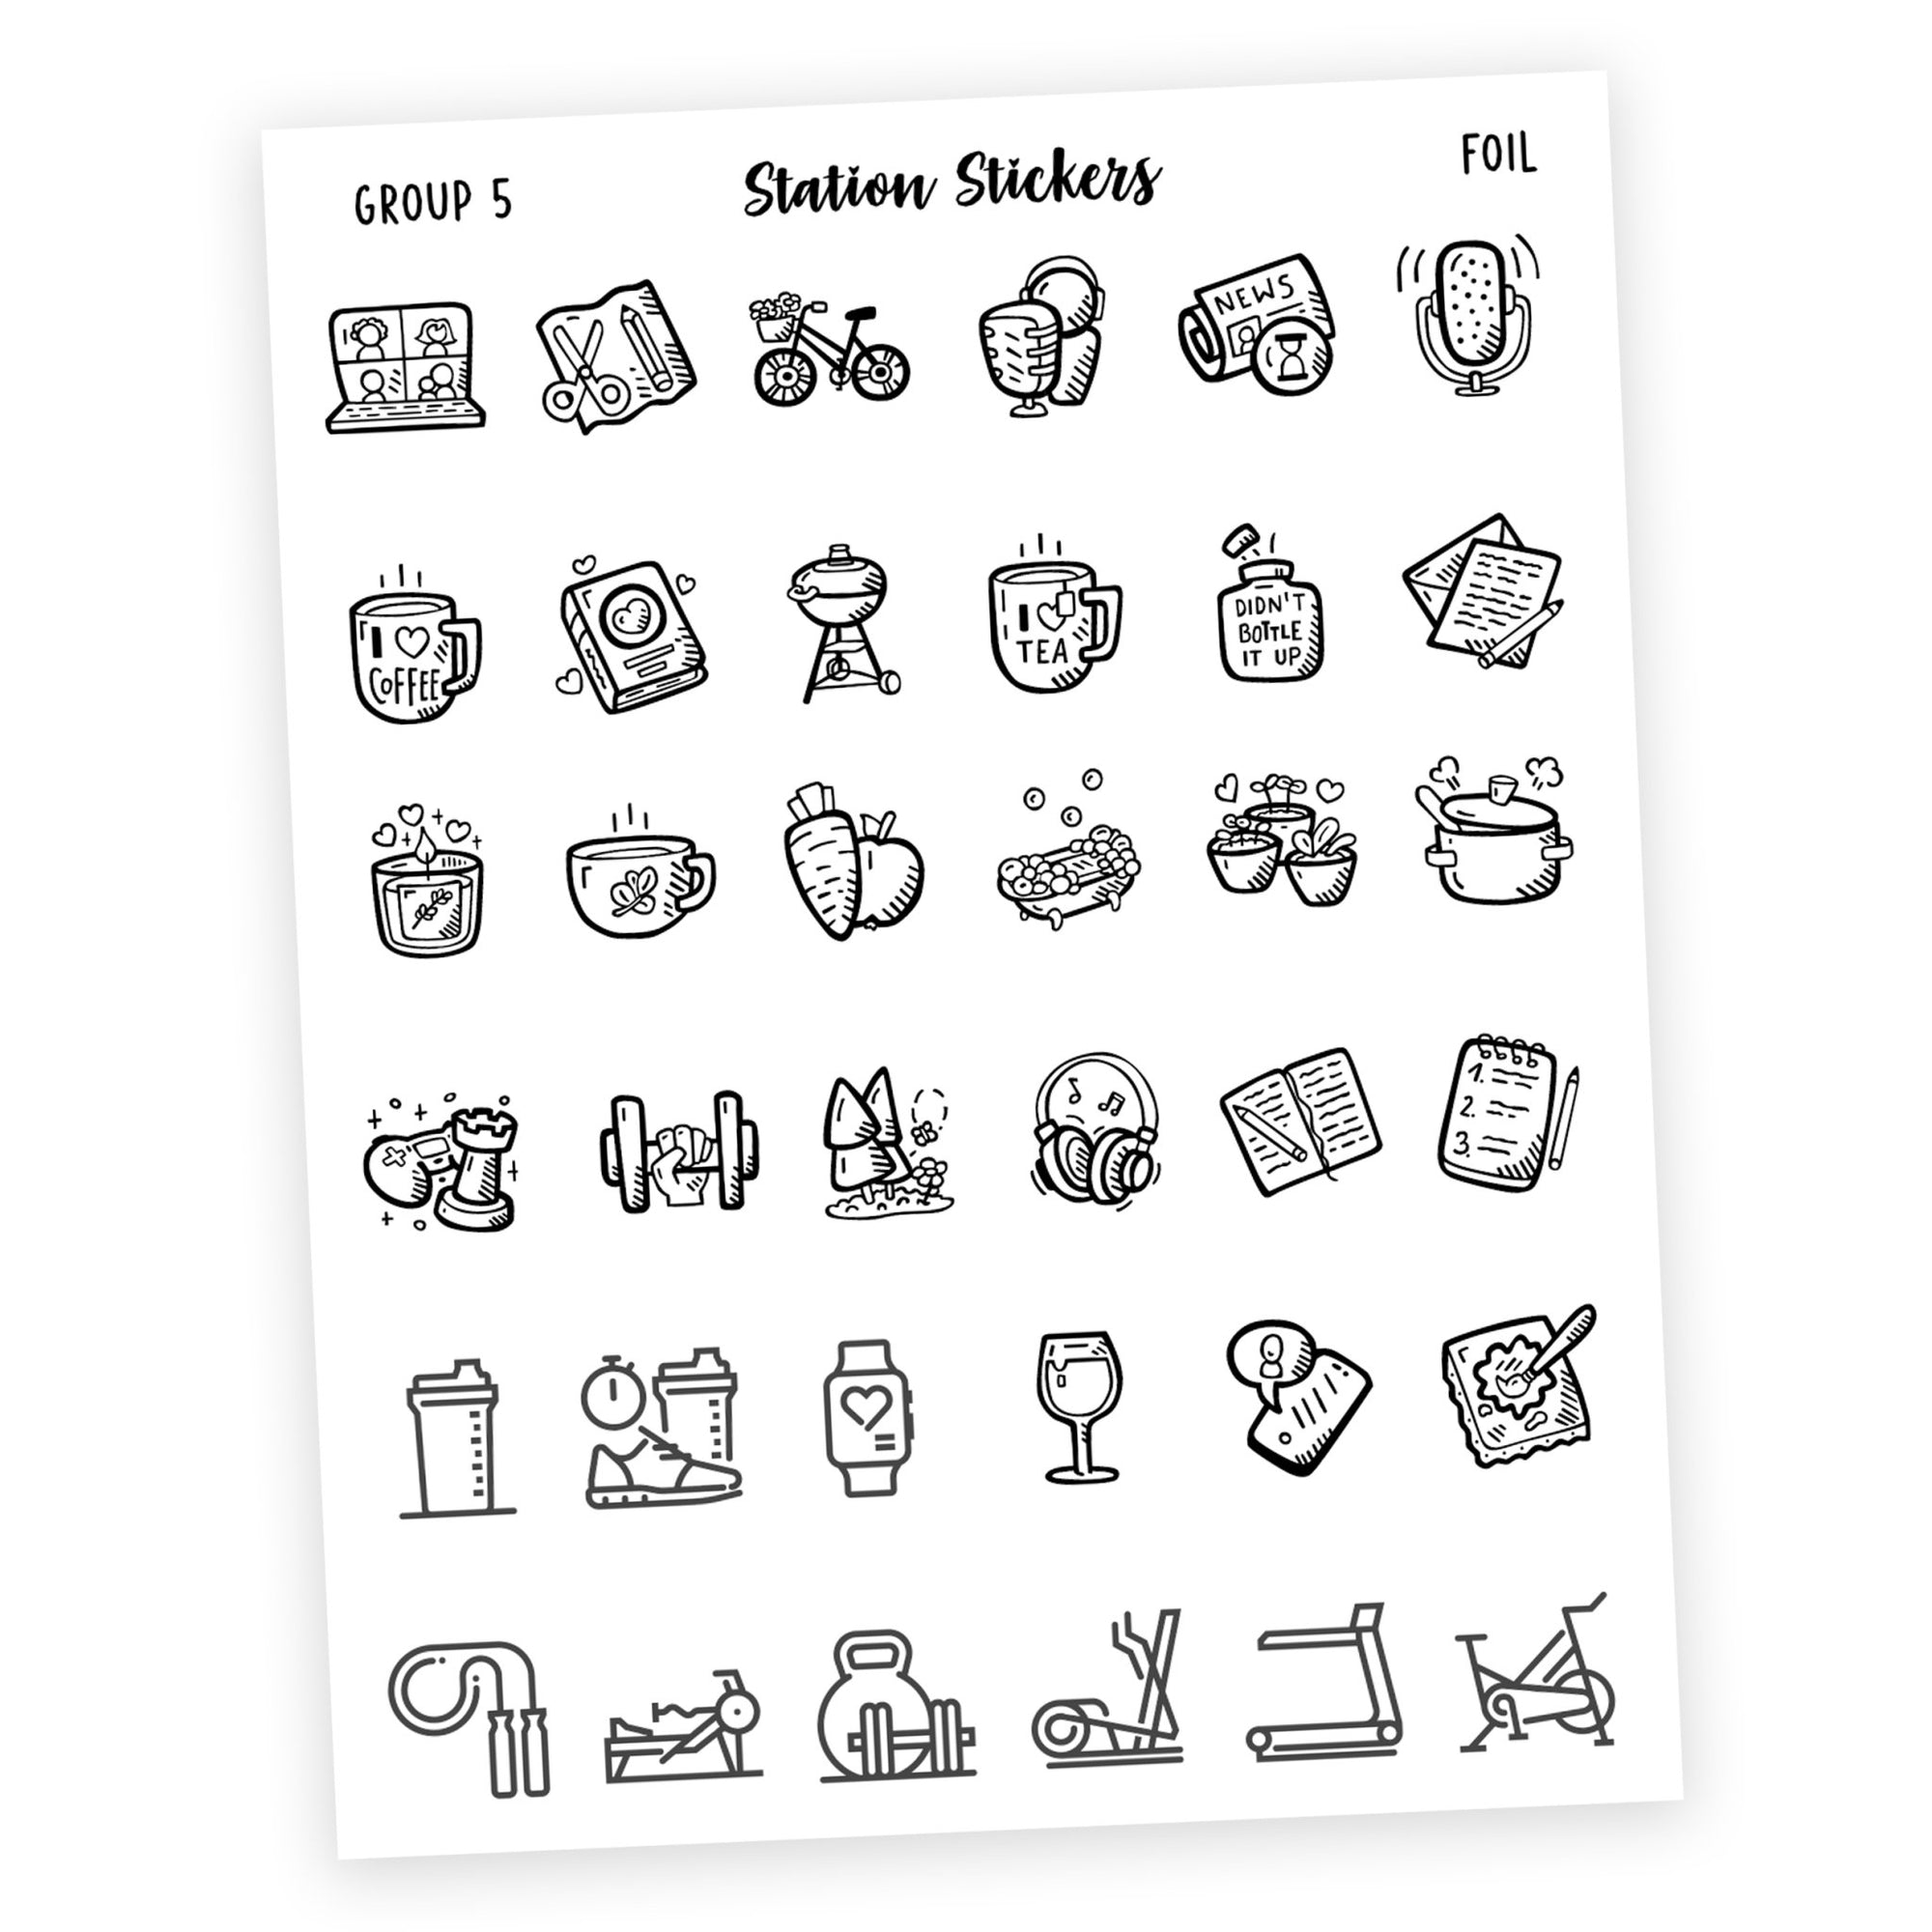 GROUP 5 • ICONS [Coming 6/25] - Station Stickers